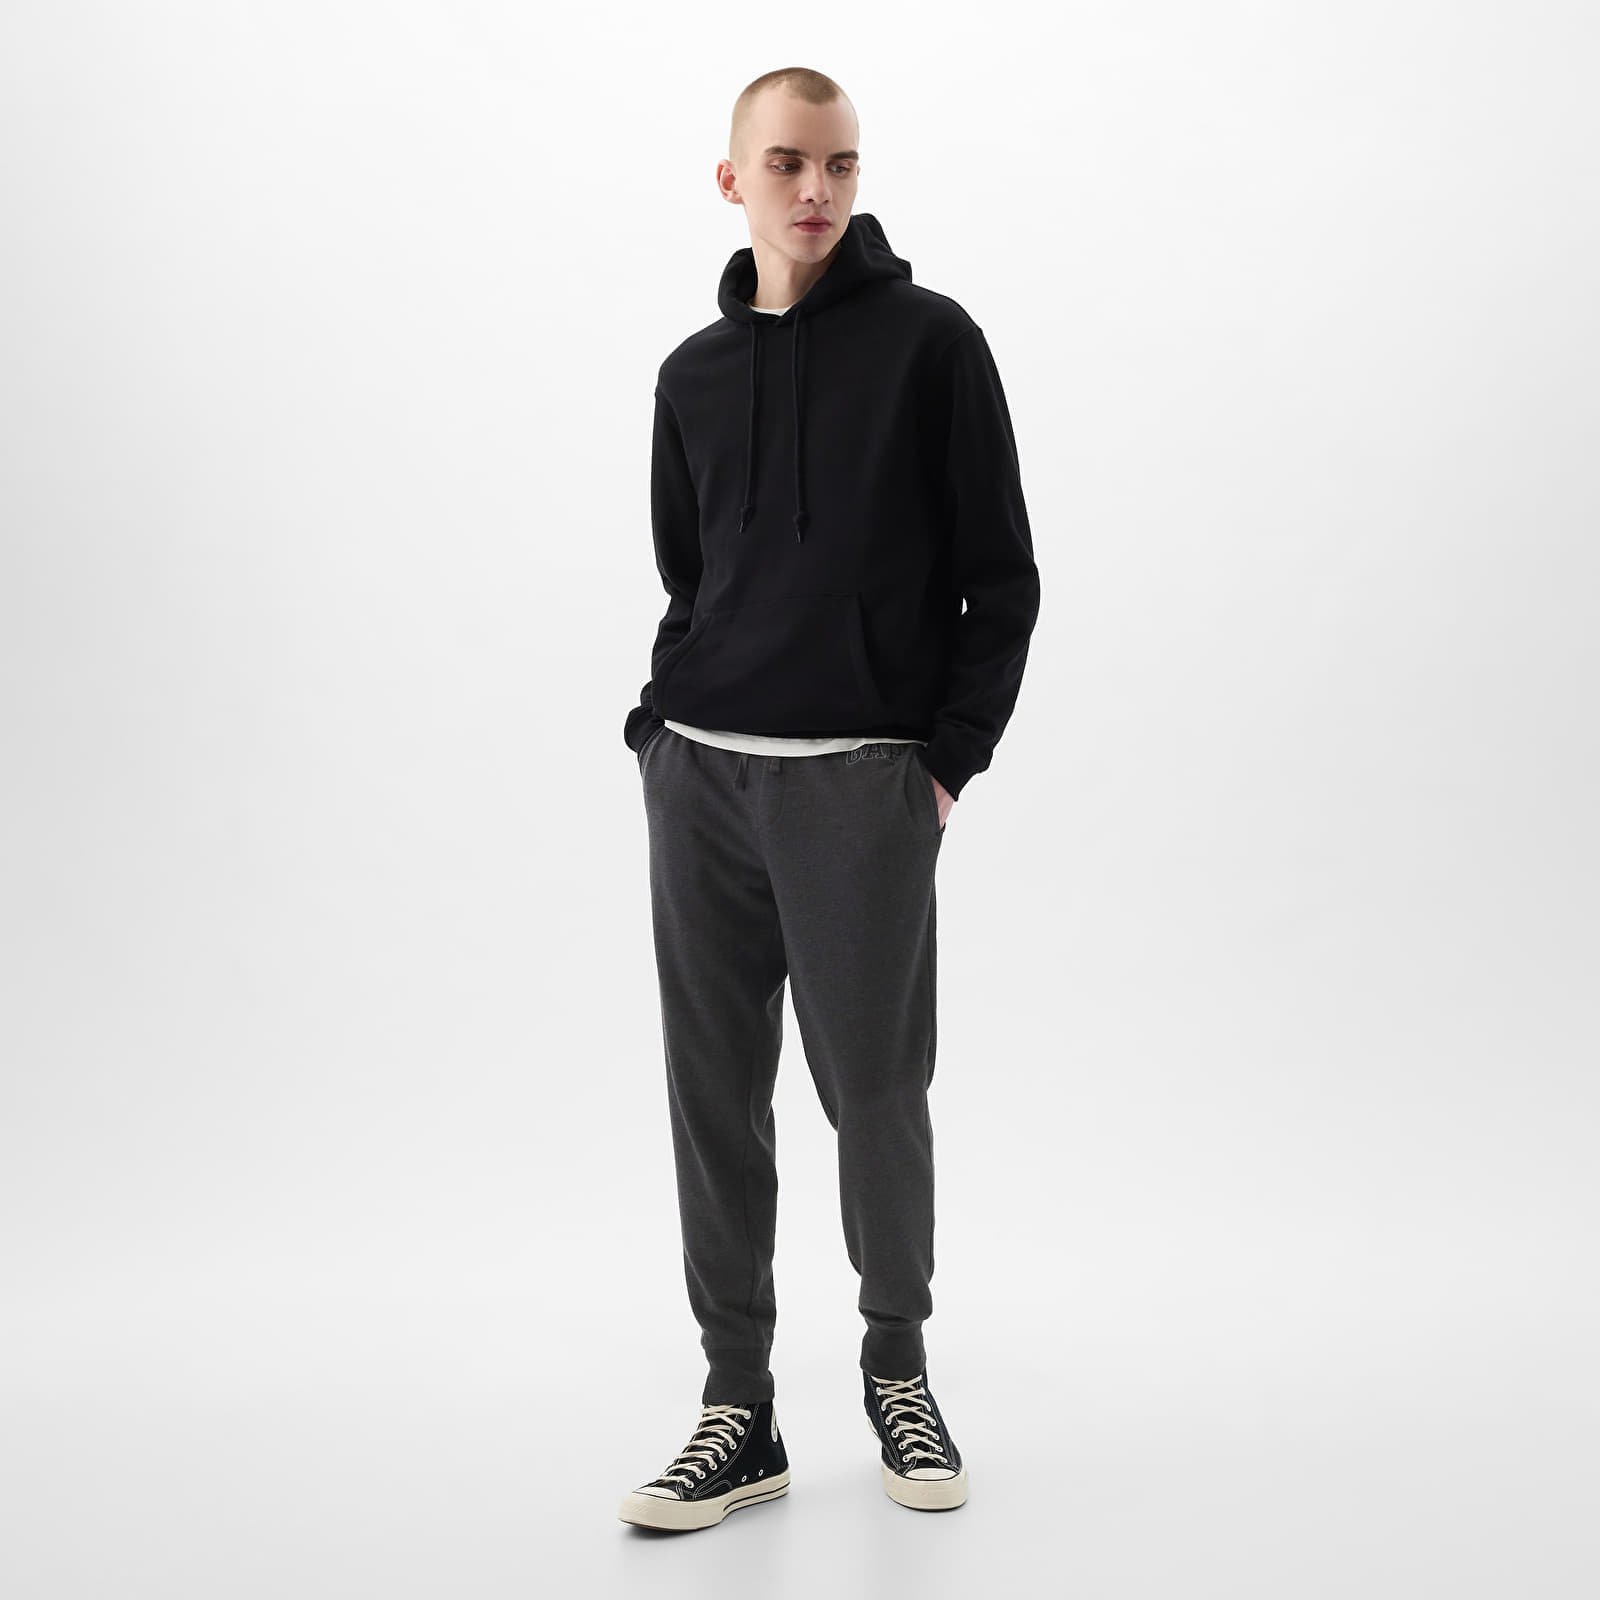 French Terry Logo Joggers B85 Charcoal Heather Grey